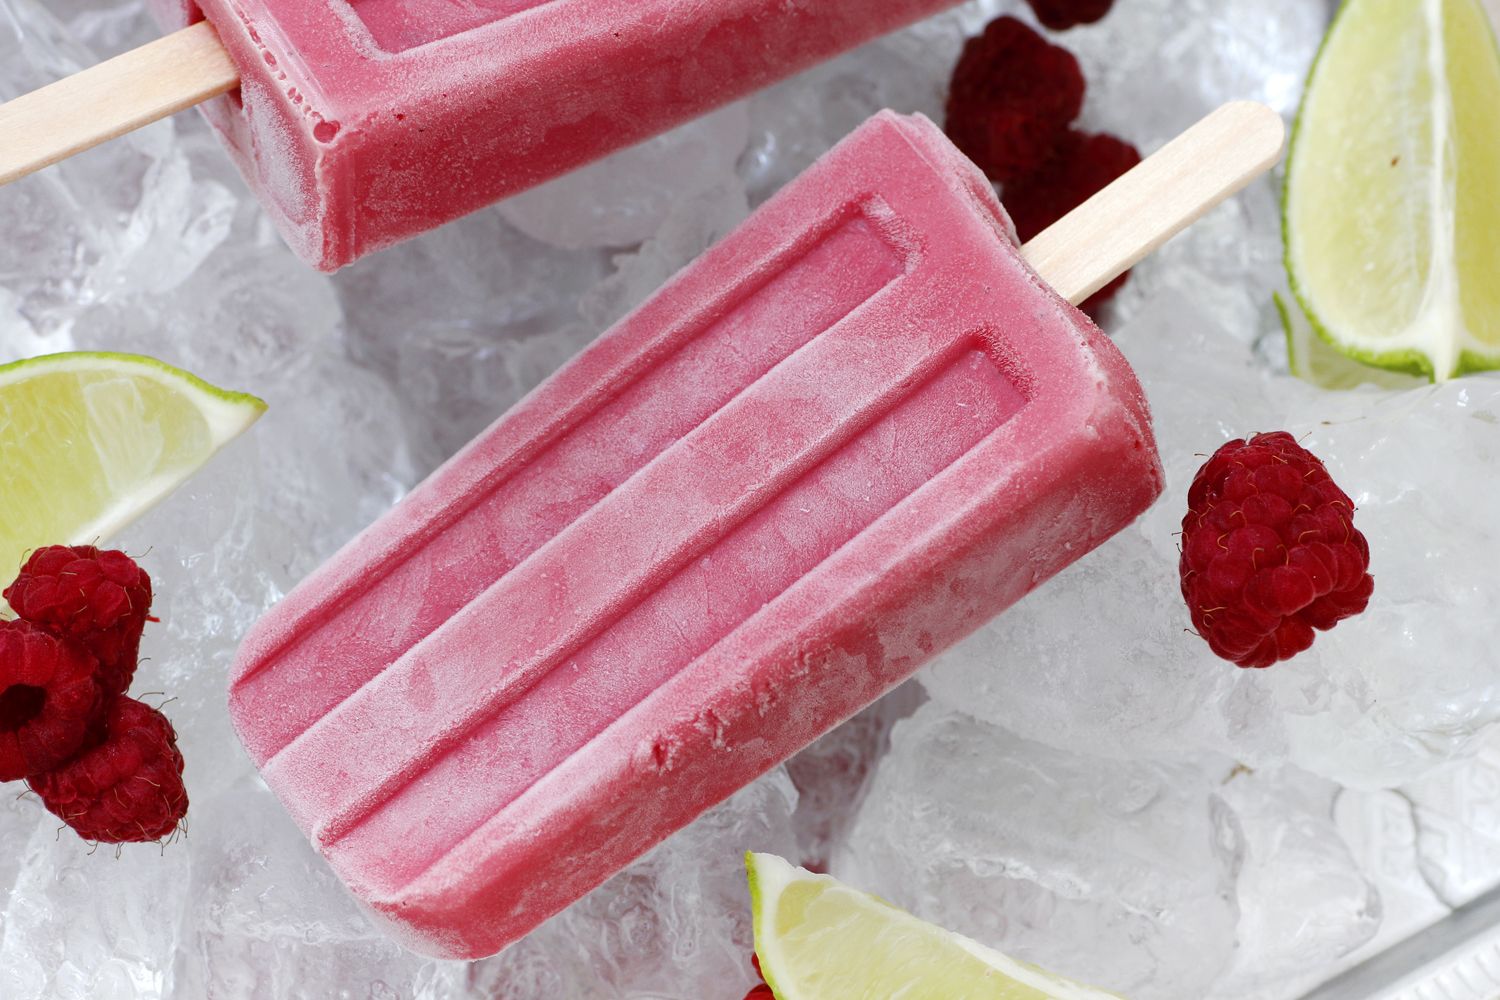 Raspberry Popsicles with Lime and Yogurt